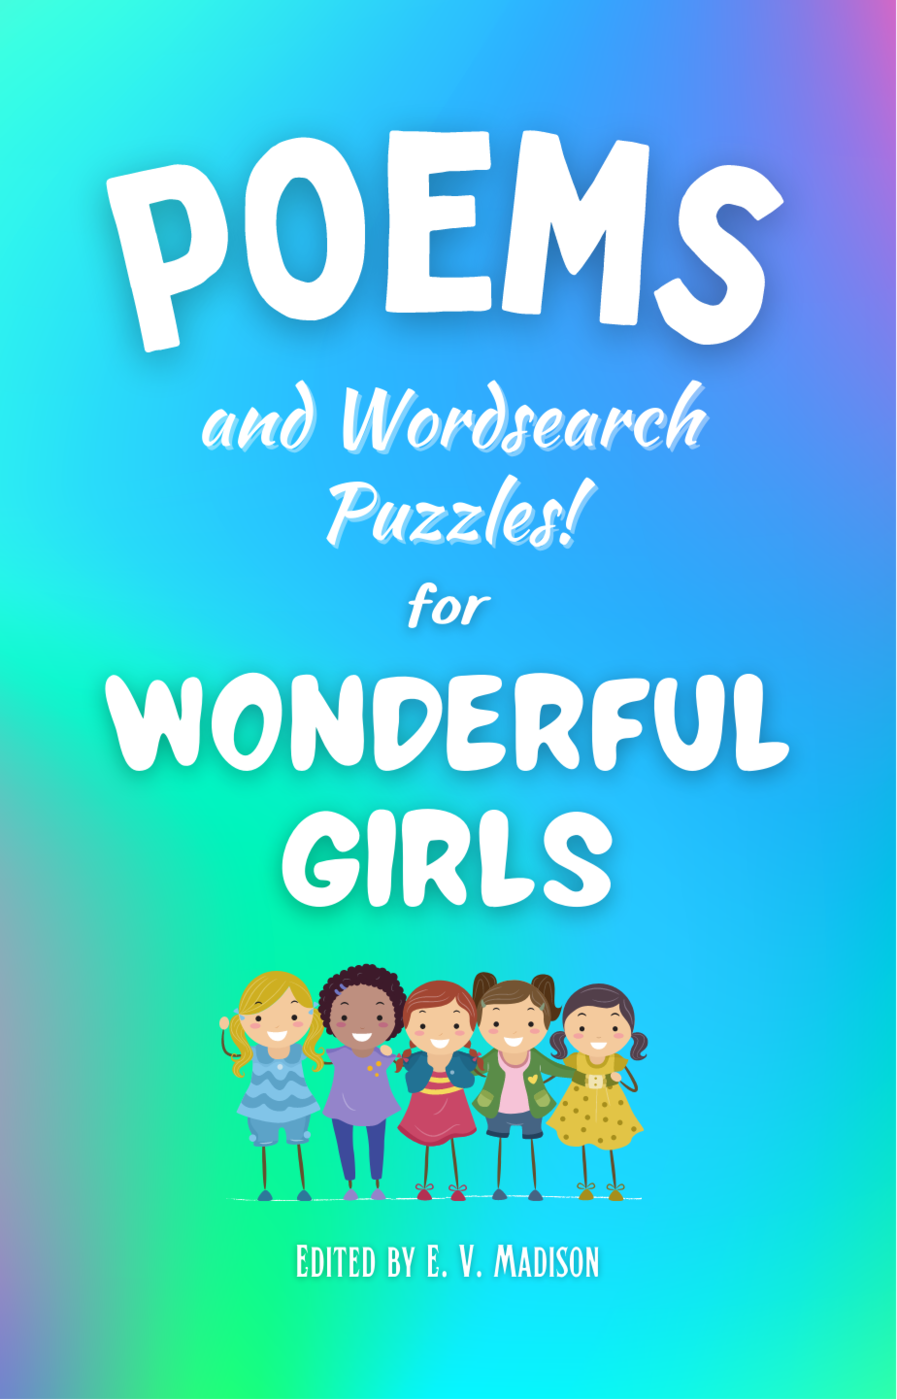 Poems and Wordsearch Puzzles! for Wonderful Girls